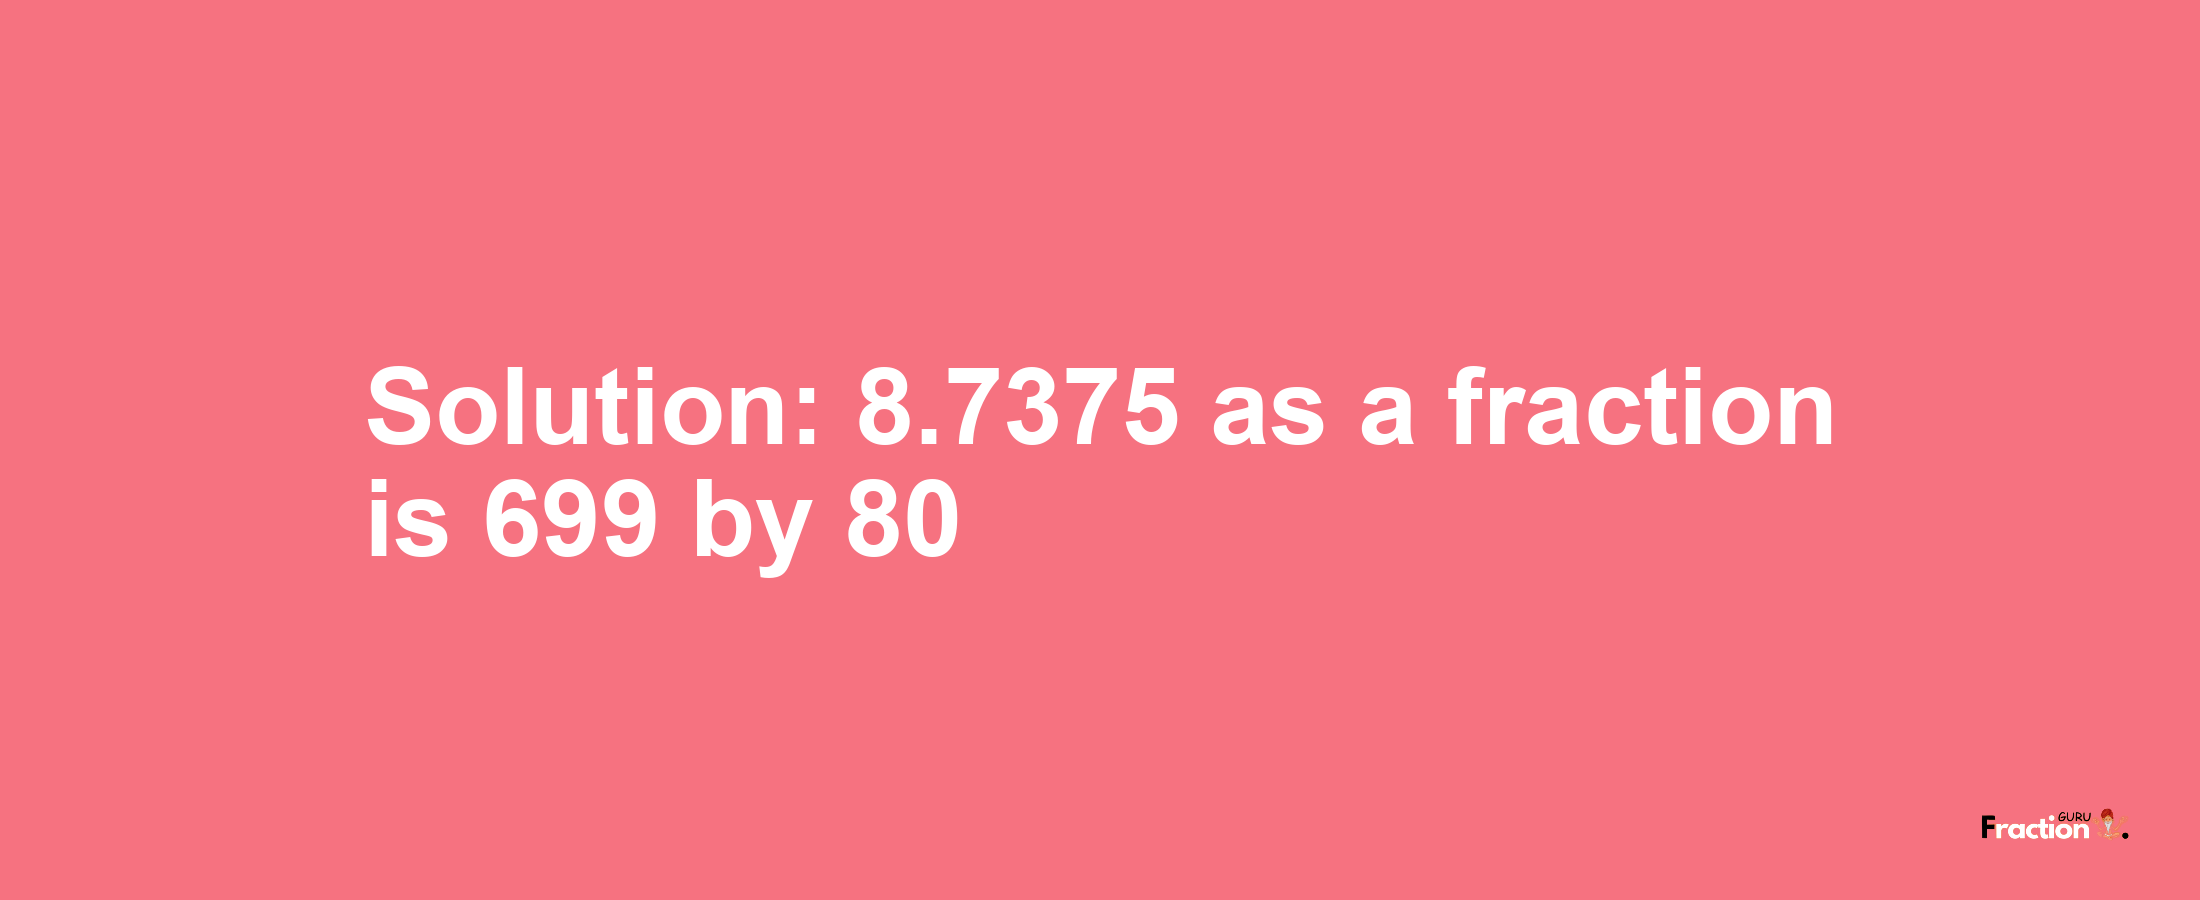 Solution:8.7375 as a fraction is 699/80